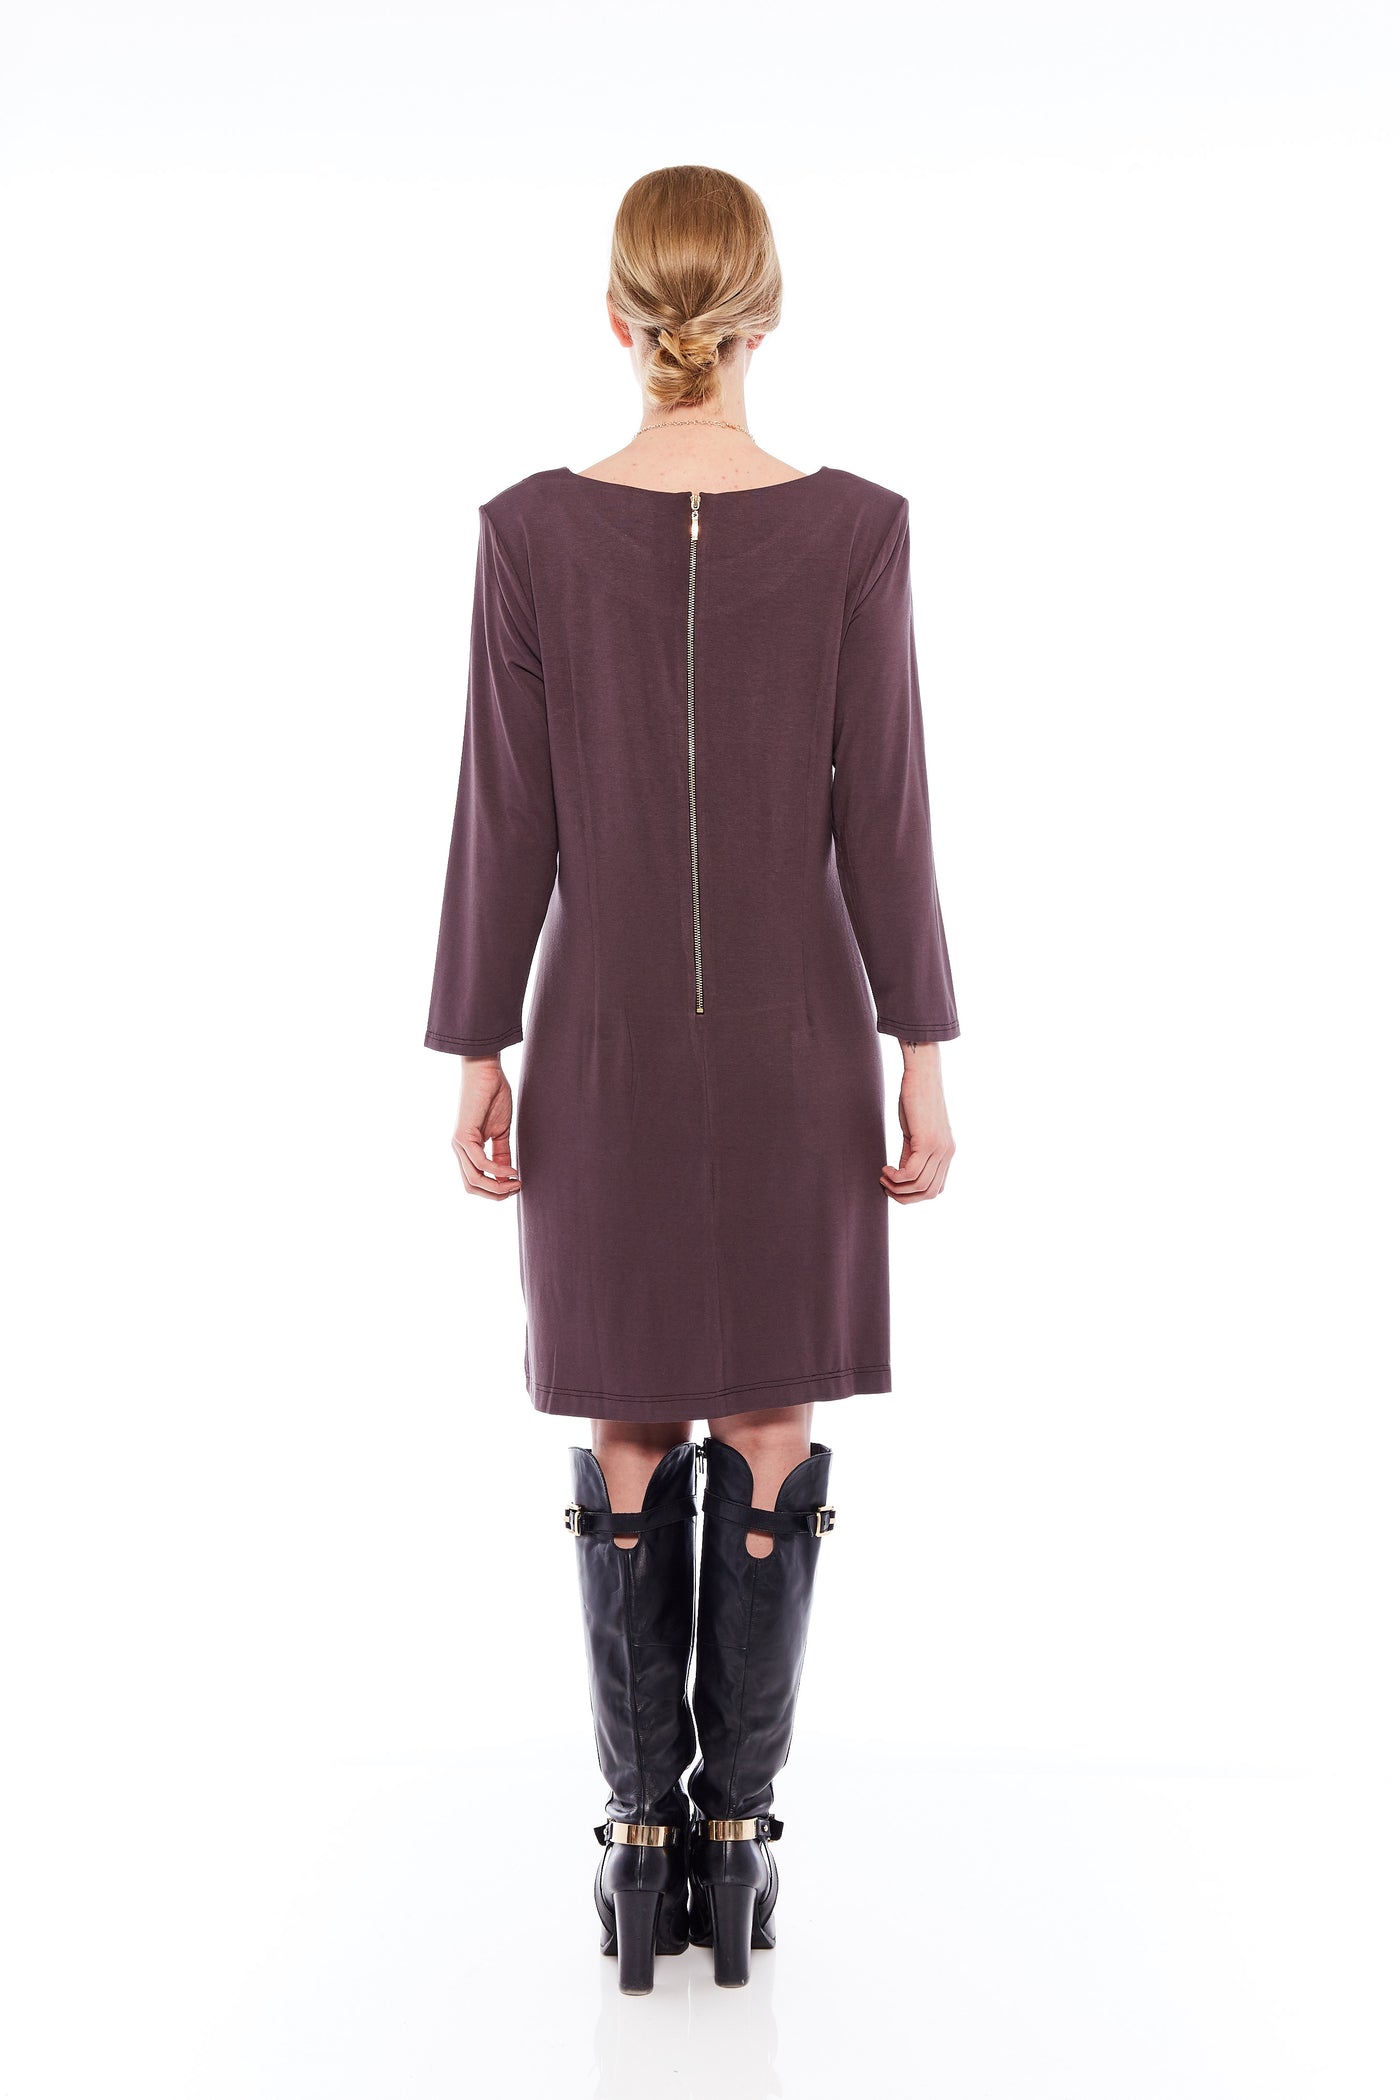 THE ALL DAY LONG DRESS IN NUT BROWN